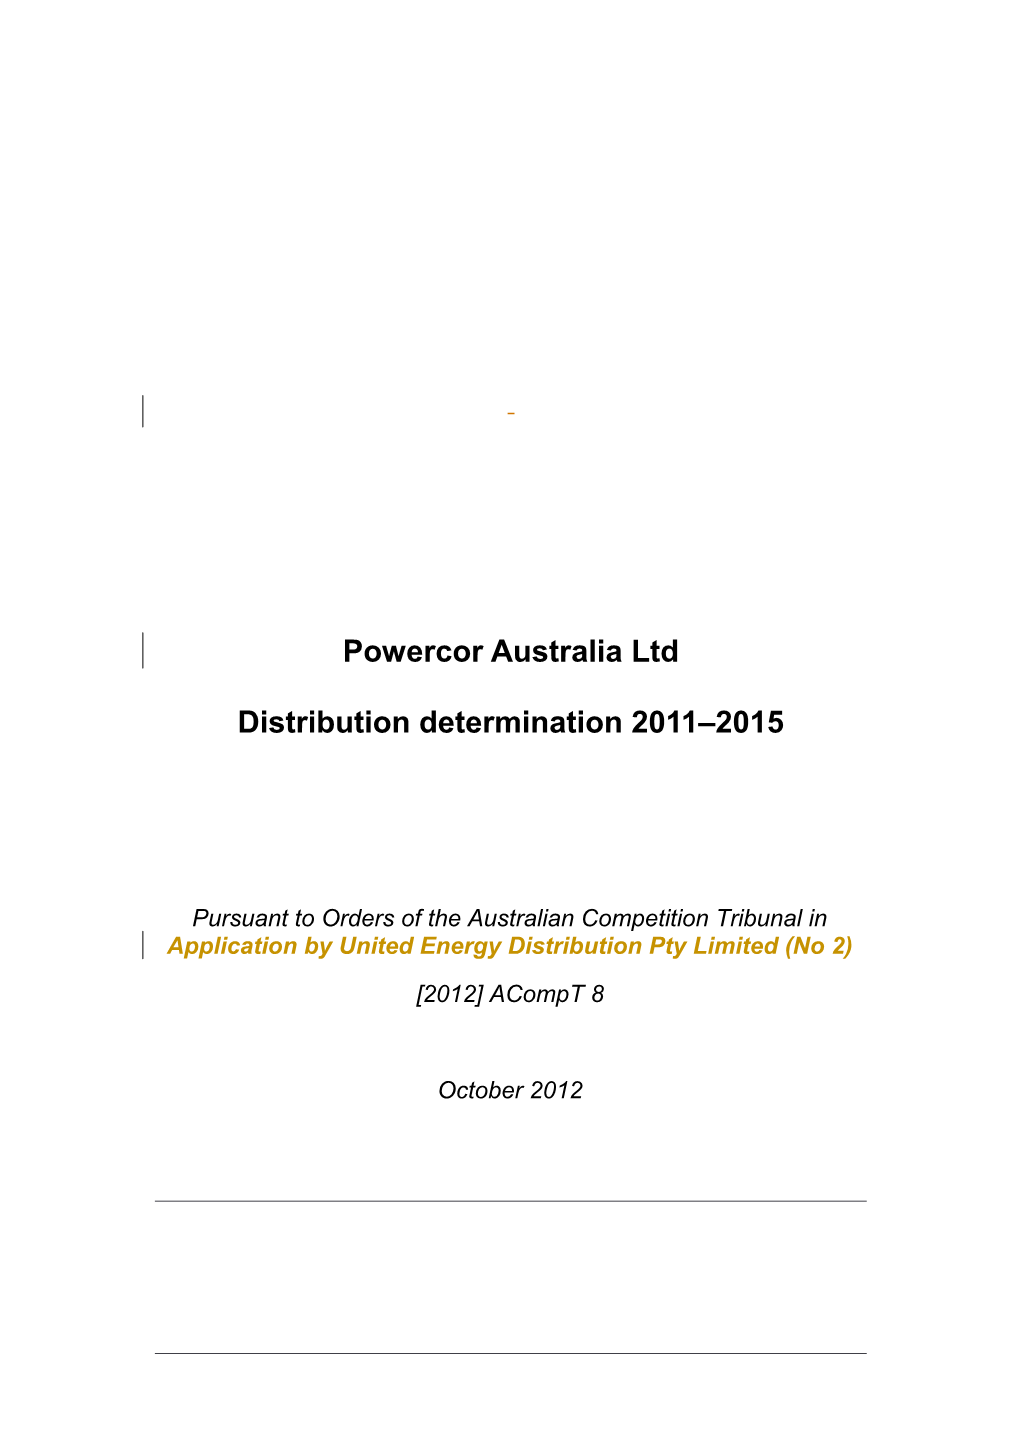 Powercor Distribution Determination Amended in Accordance with the Orders of the Tribunal